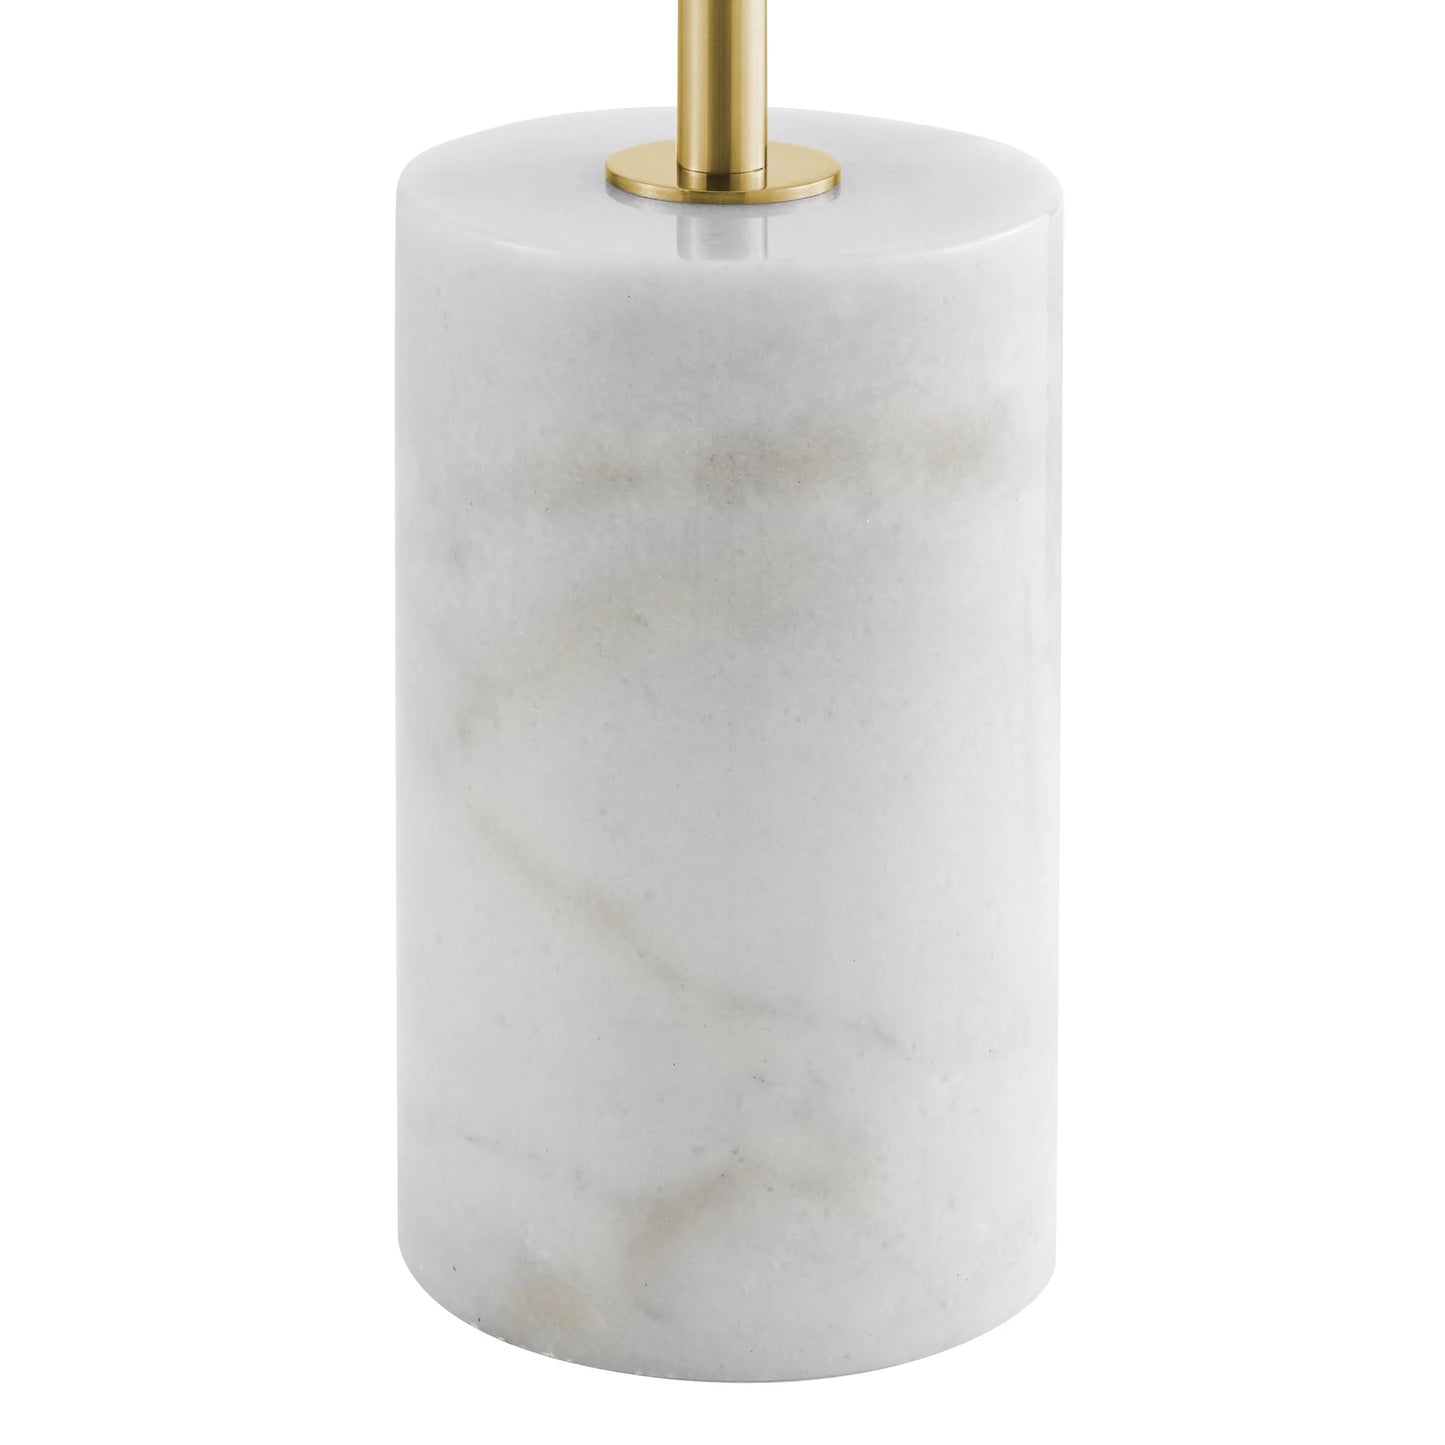 Finesse Decor Anechdoche 2 Lights Gold and White Floor Lamp 4